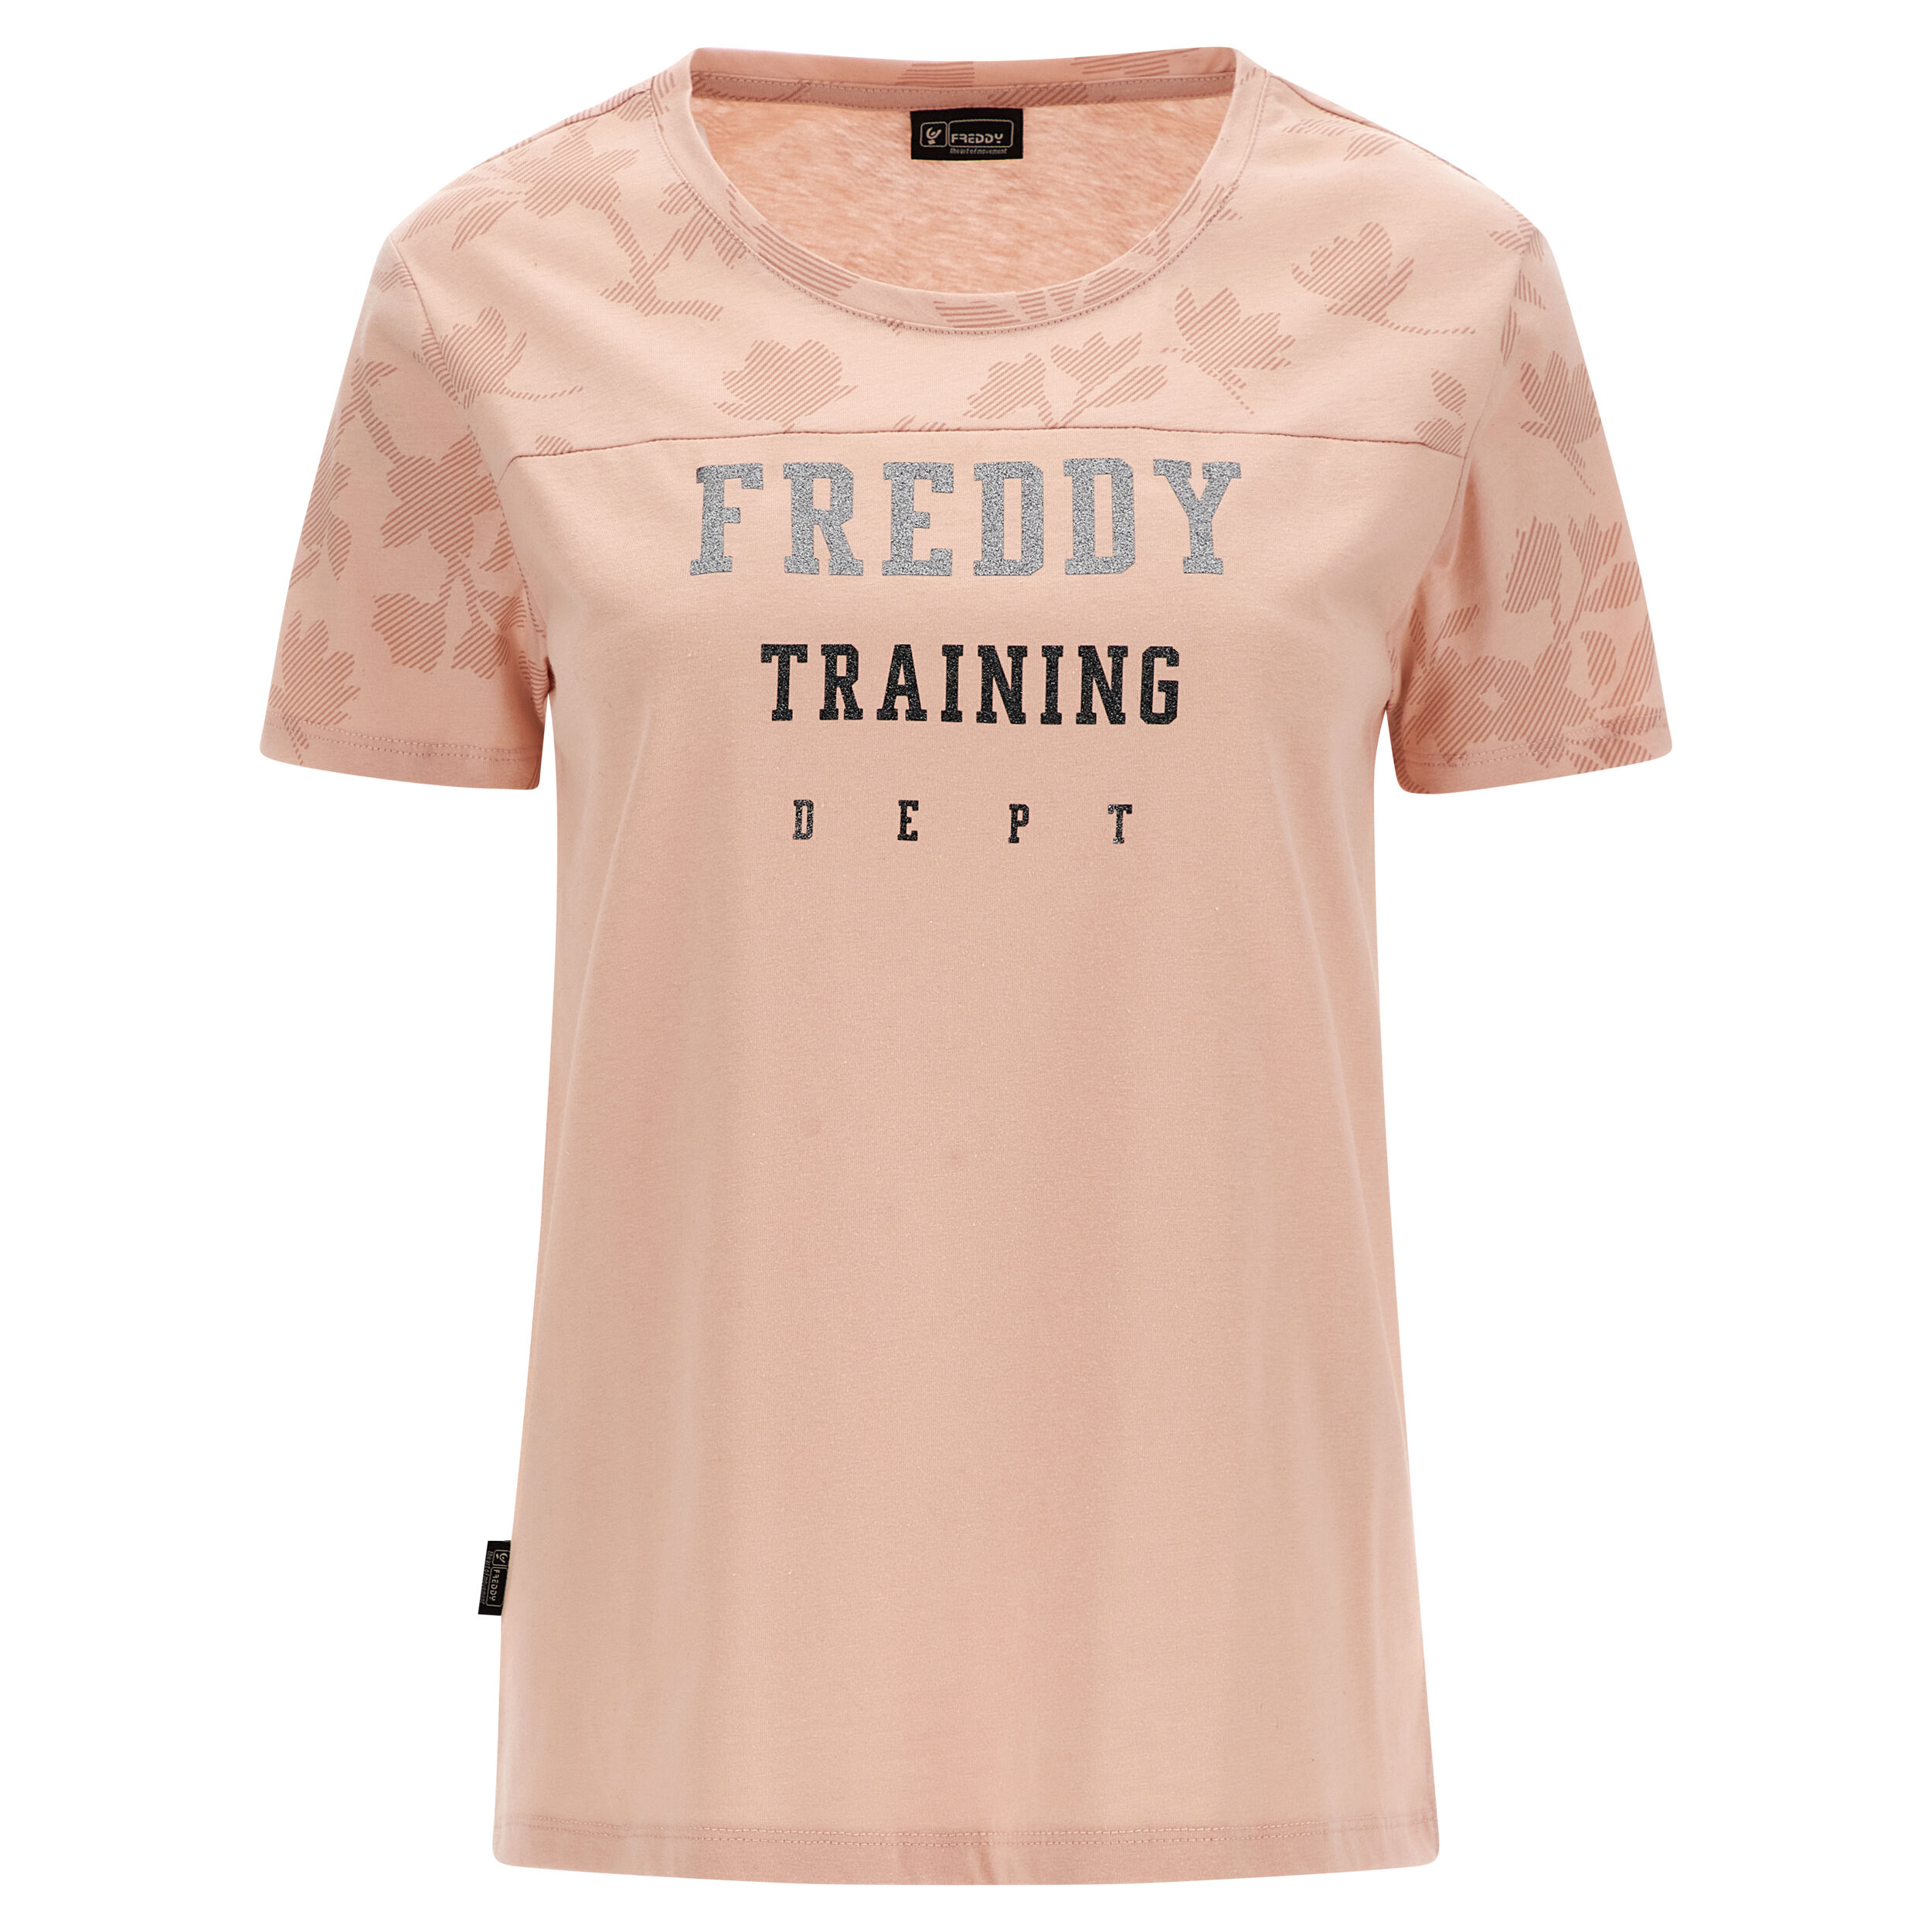 Freddy T-shirt comfort fit con maniche e spalle stampa floreale Pink-Allover Flower Pink Donna Small